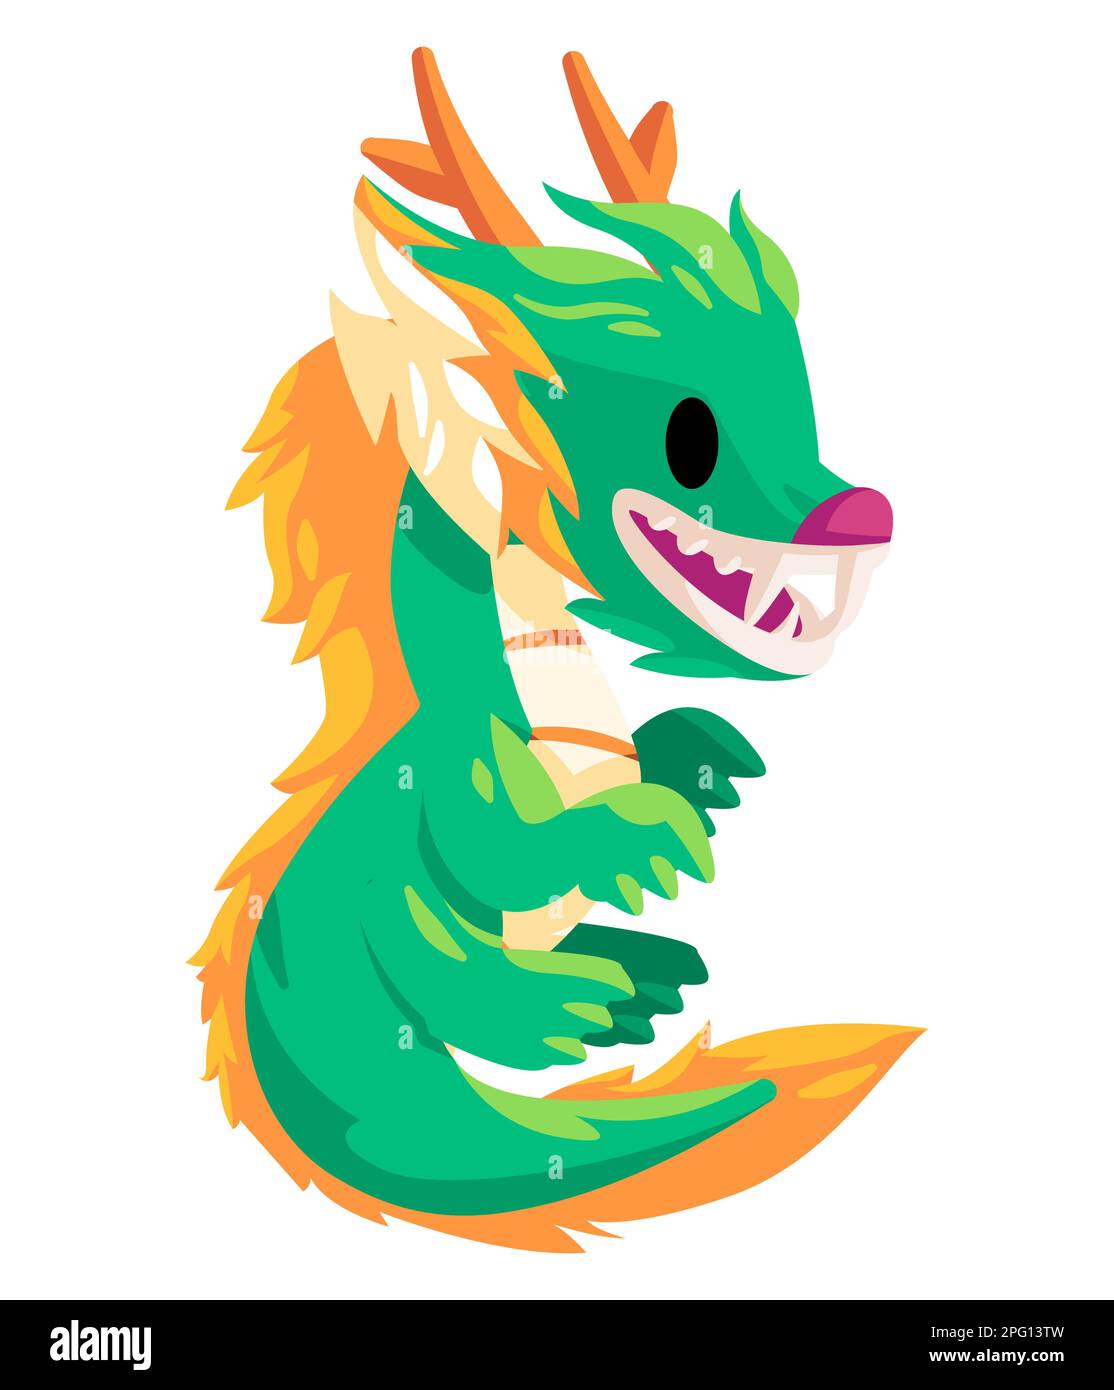 Dragon character of chinese mythology monster with funny mascot cartoon style green color Stock Vector